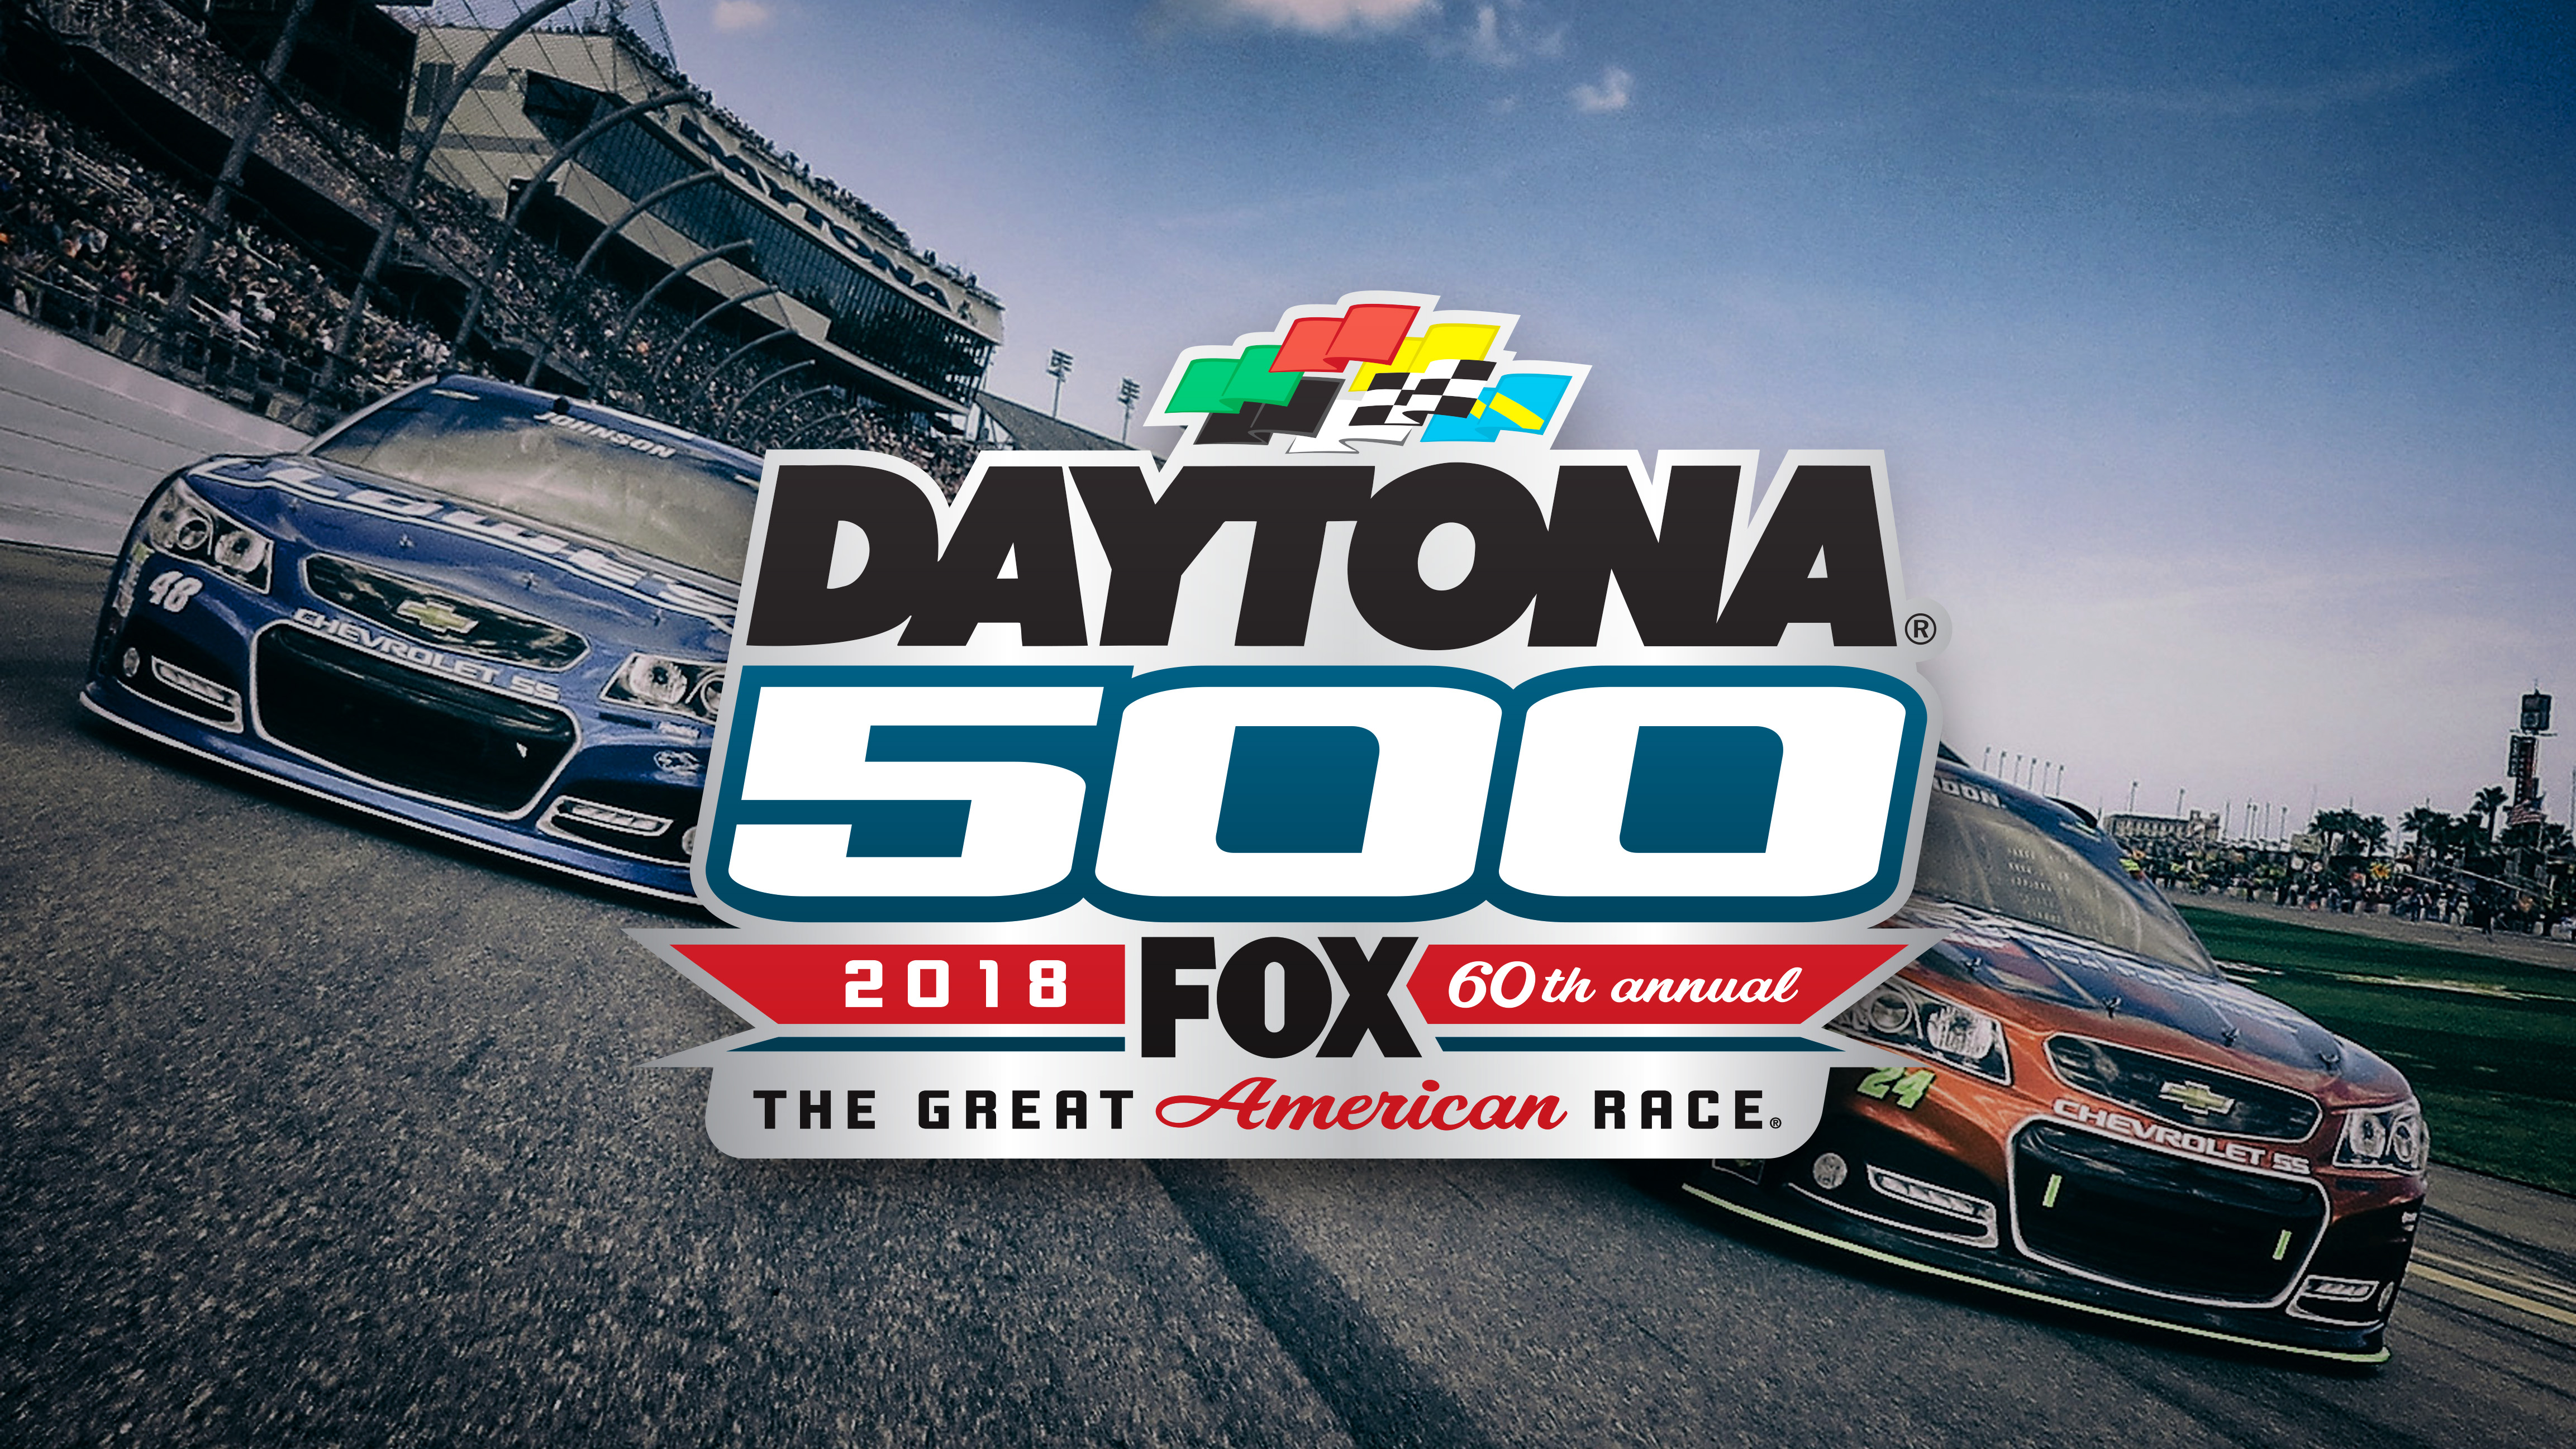 Fox Sports Shifts Daytona 500 Production Into High Gear With New Cameras, Under-the-Hood Enhancements